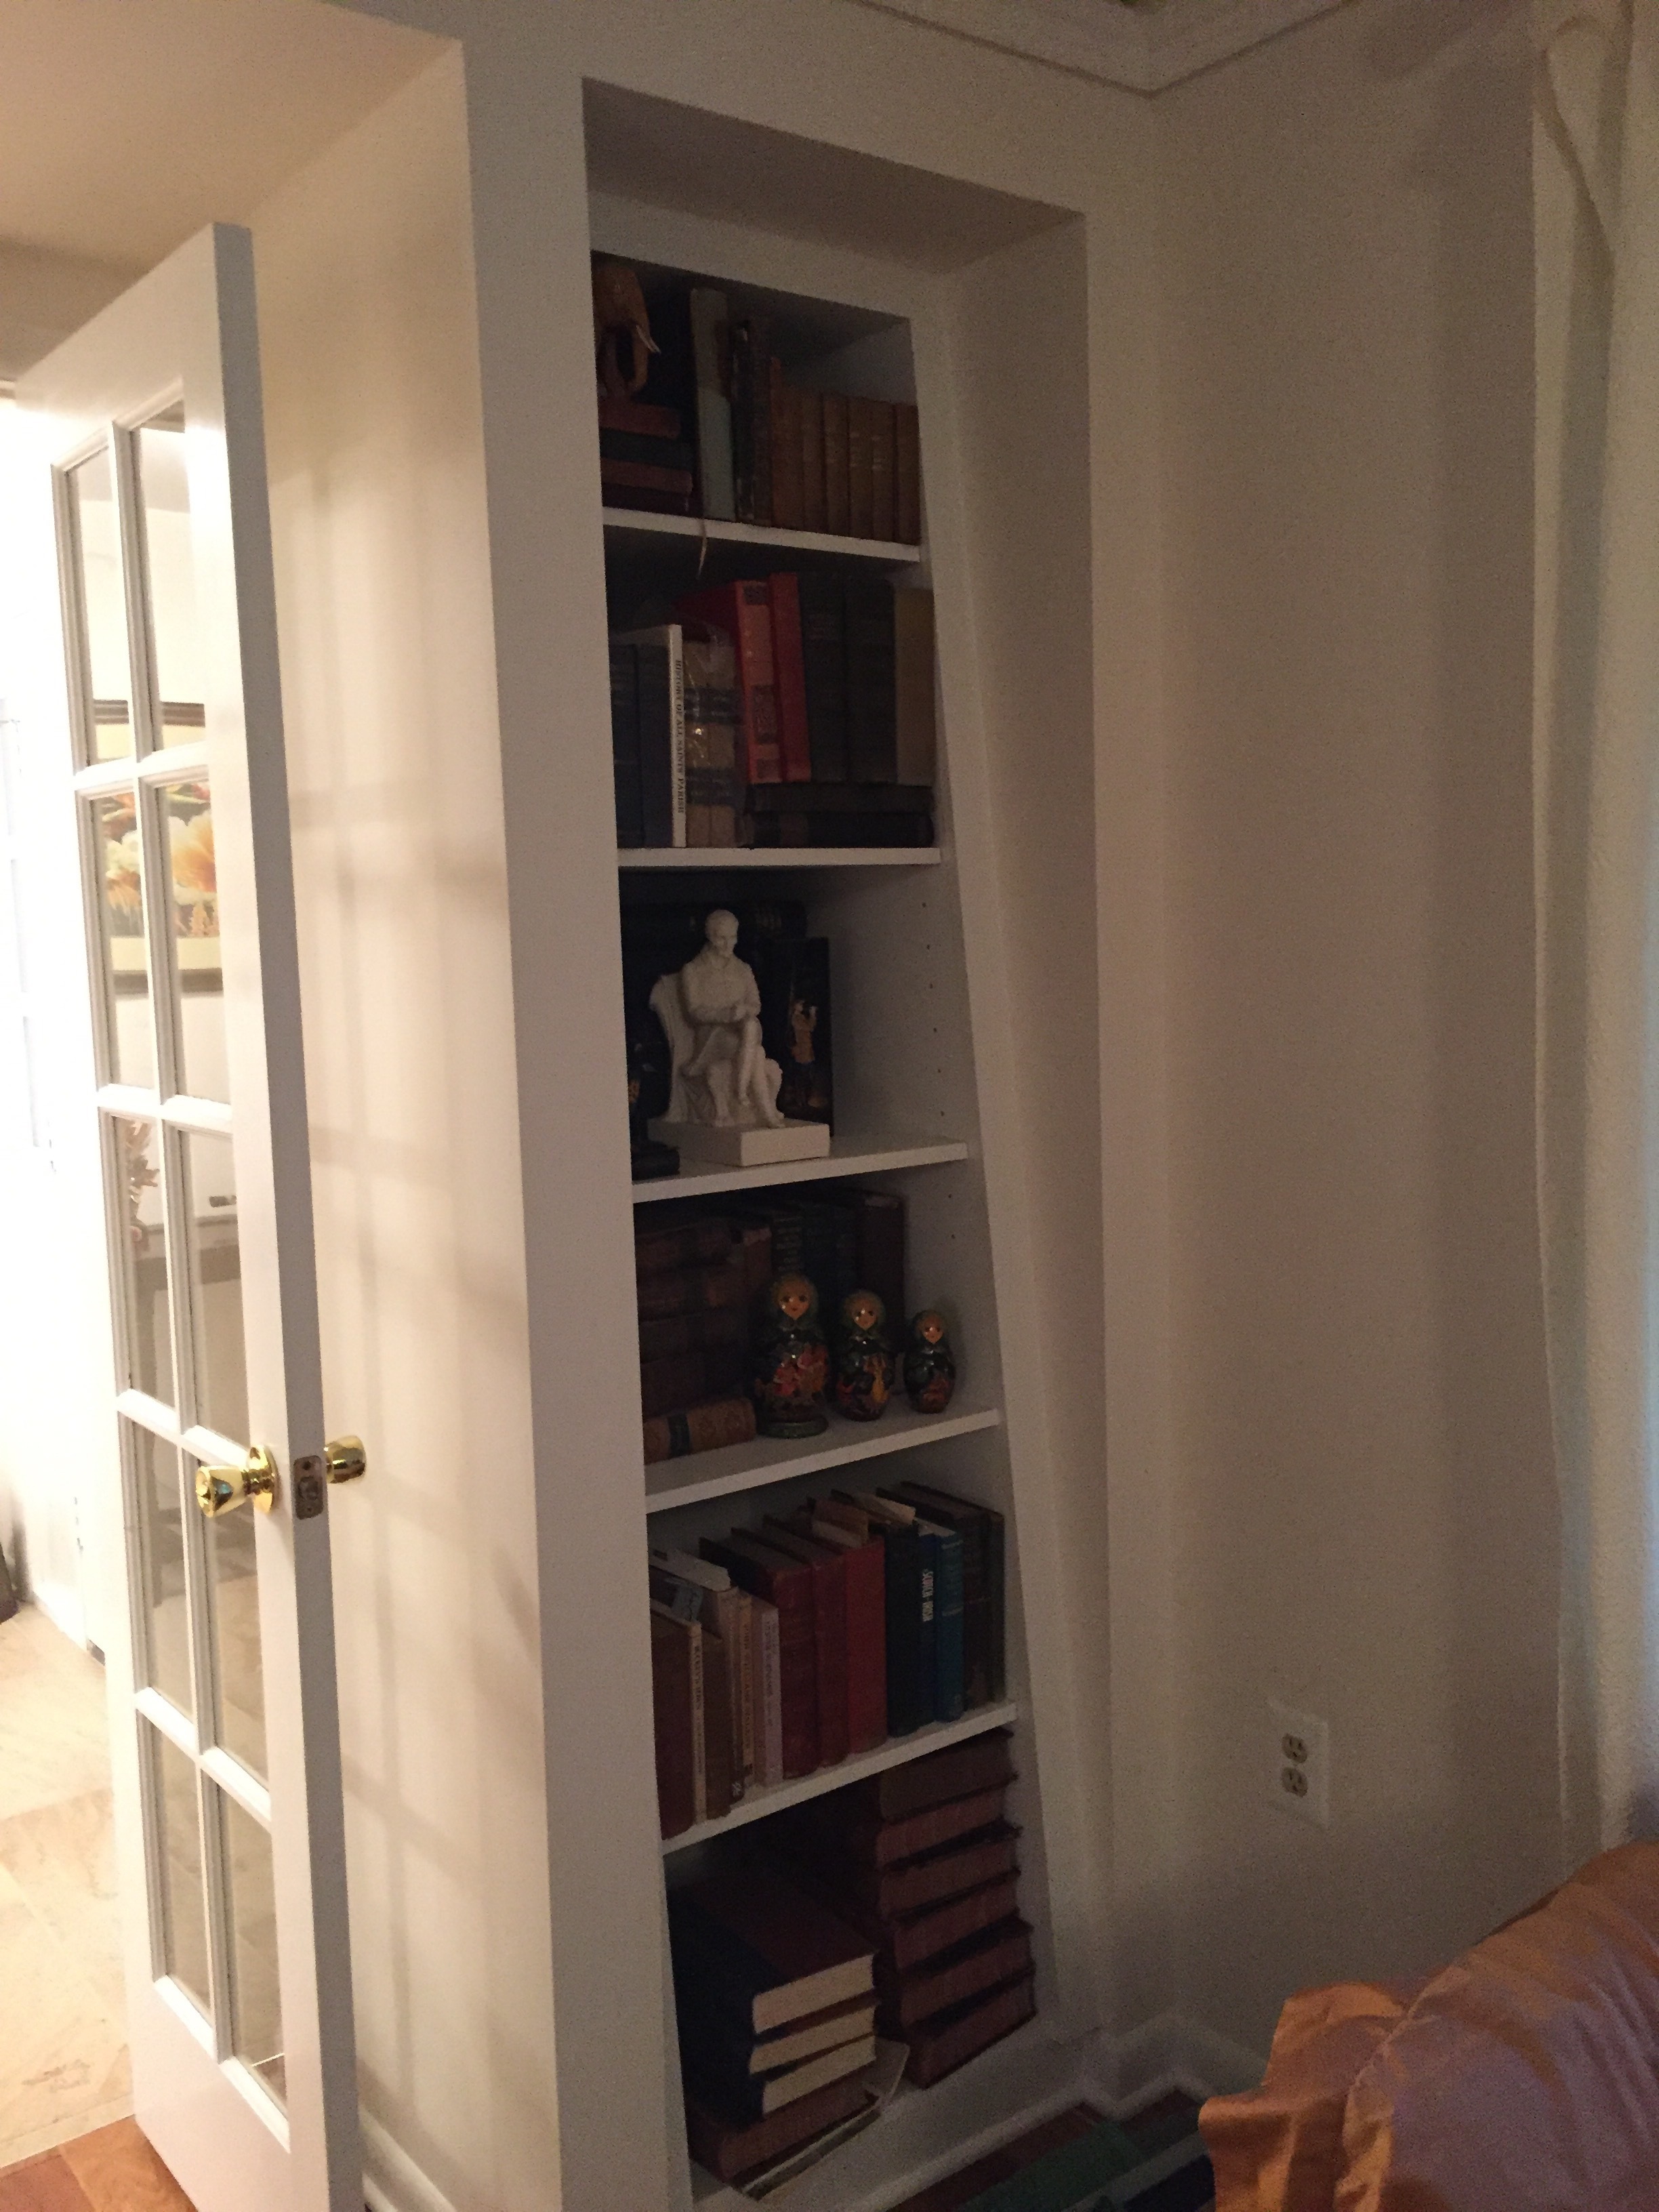  After:&nbsp; the French doors have been reversed so they don't swing into the Foyer anymore.&nbsp; A new bookcase in the corner of the Family Room provides a nice wall perpendicular to one door; a new coat closet (not shown here) in the left corner 